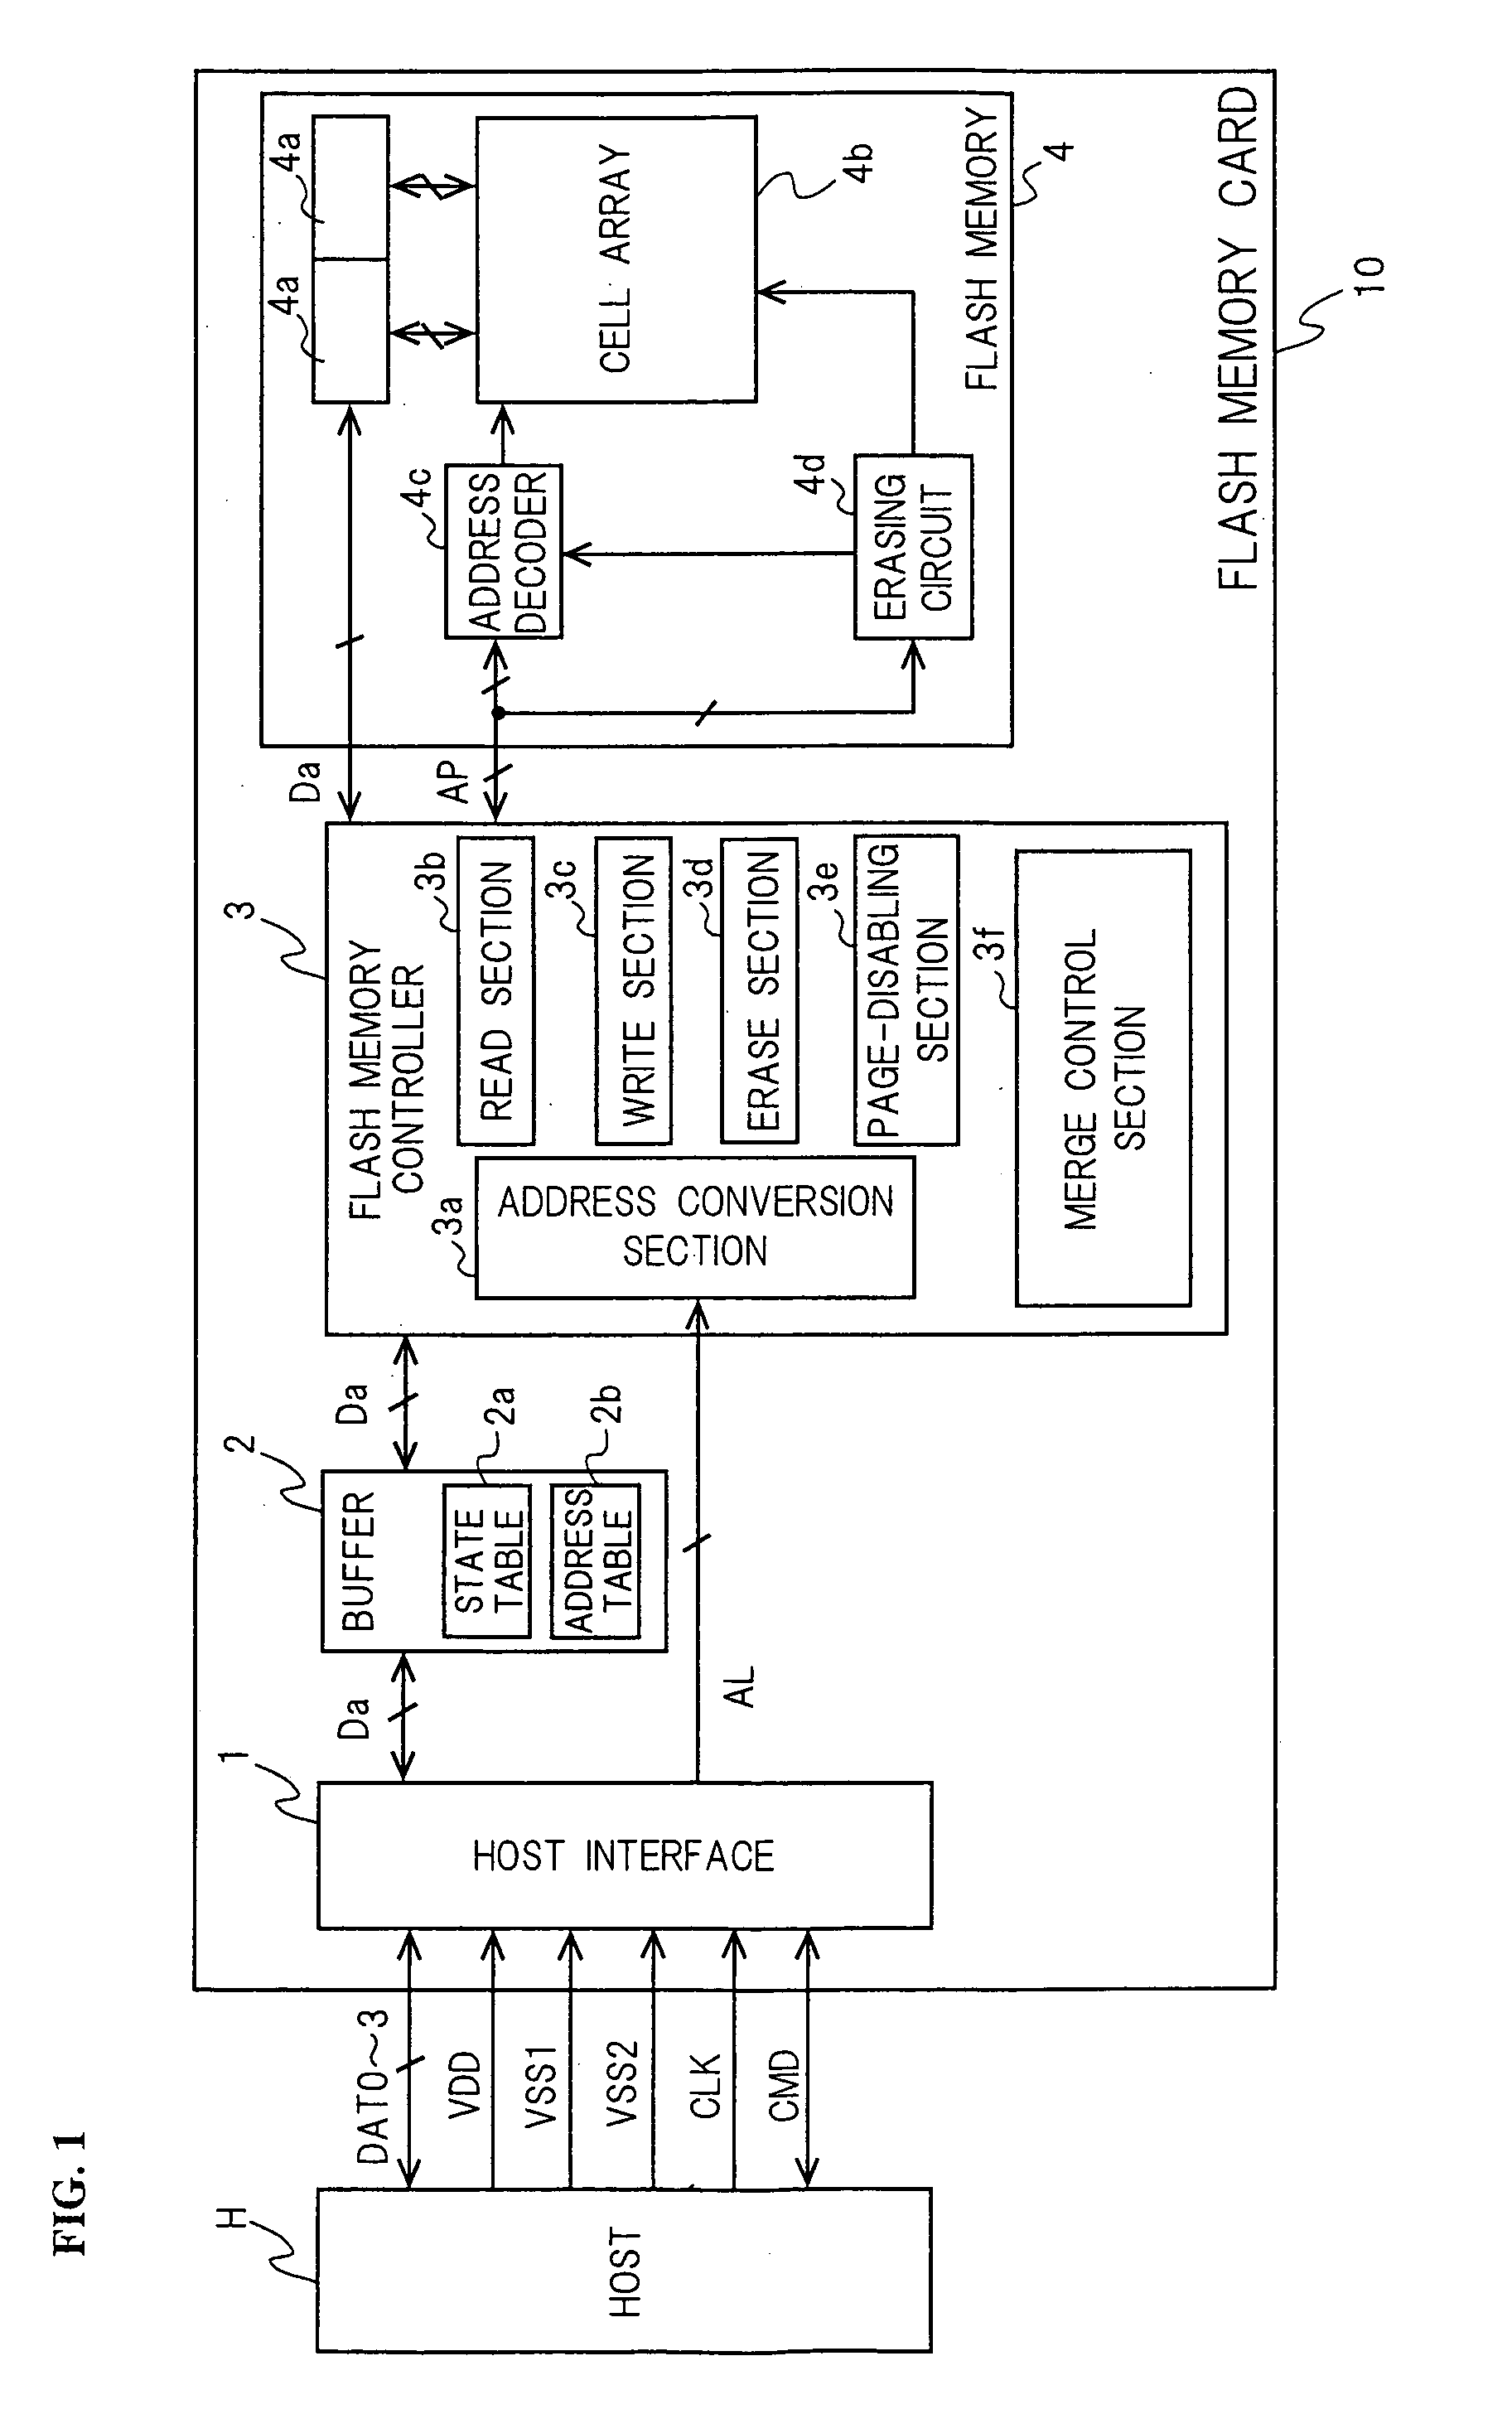 Flash memory apparatus and method for merging stored data items